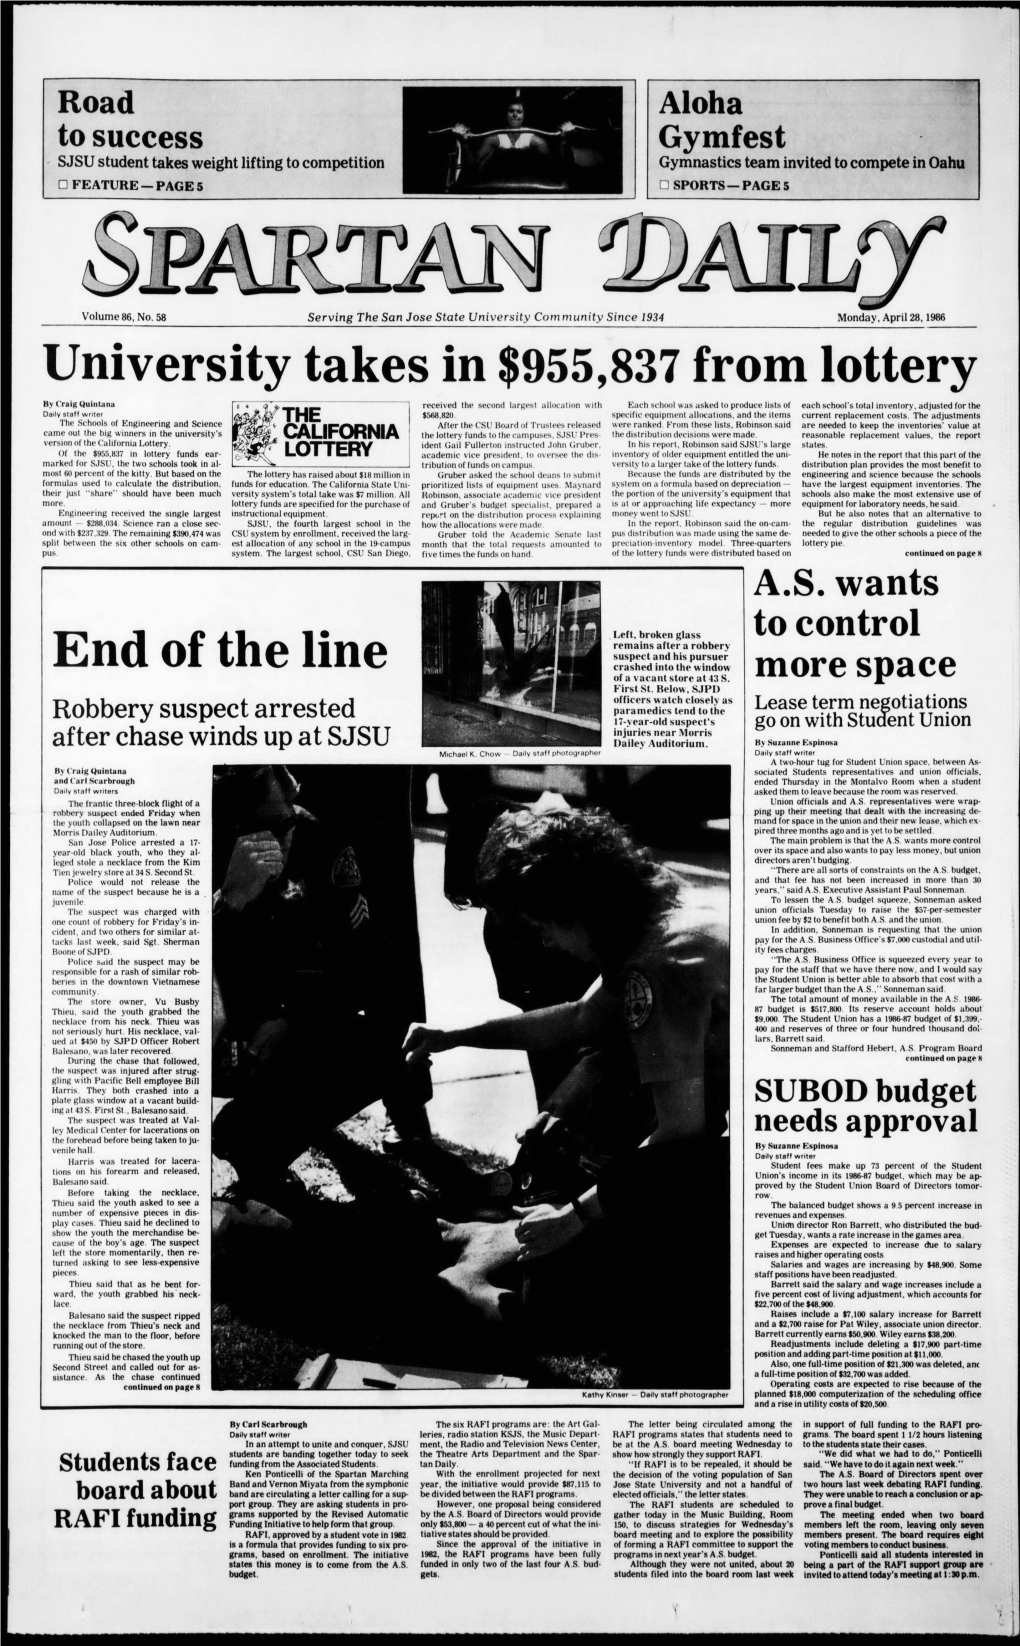 University Takes in $955,837 from Lottery End of the Line